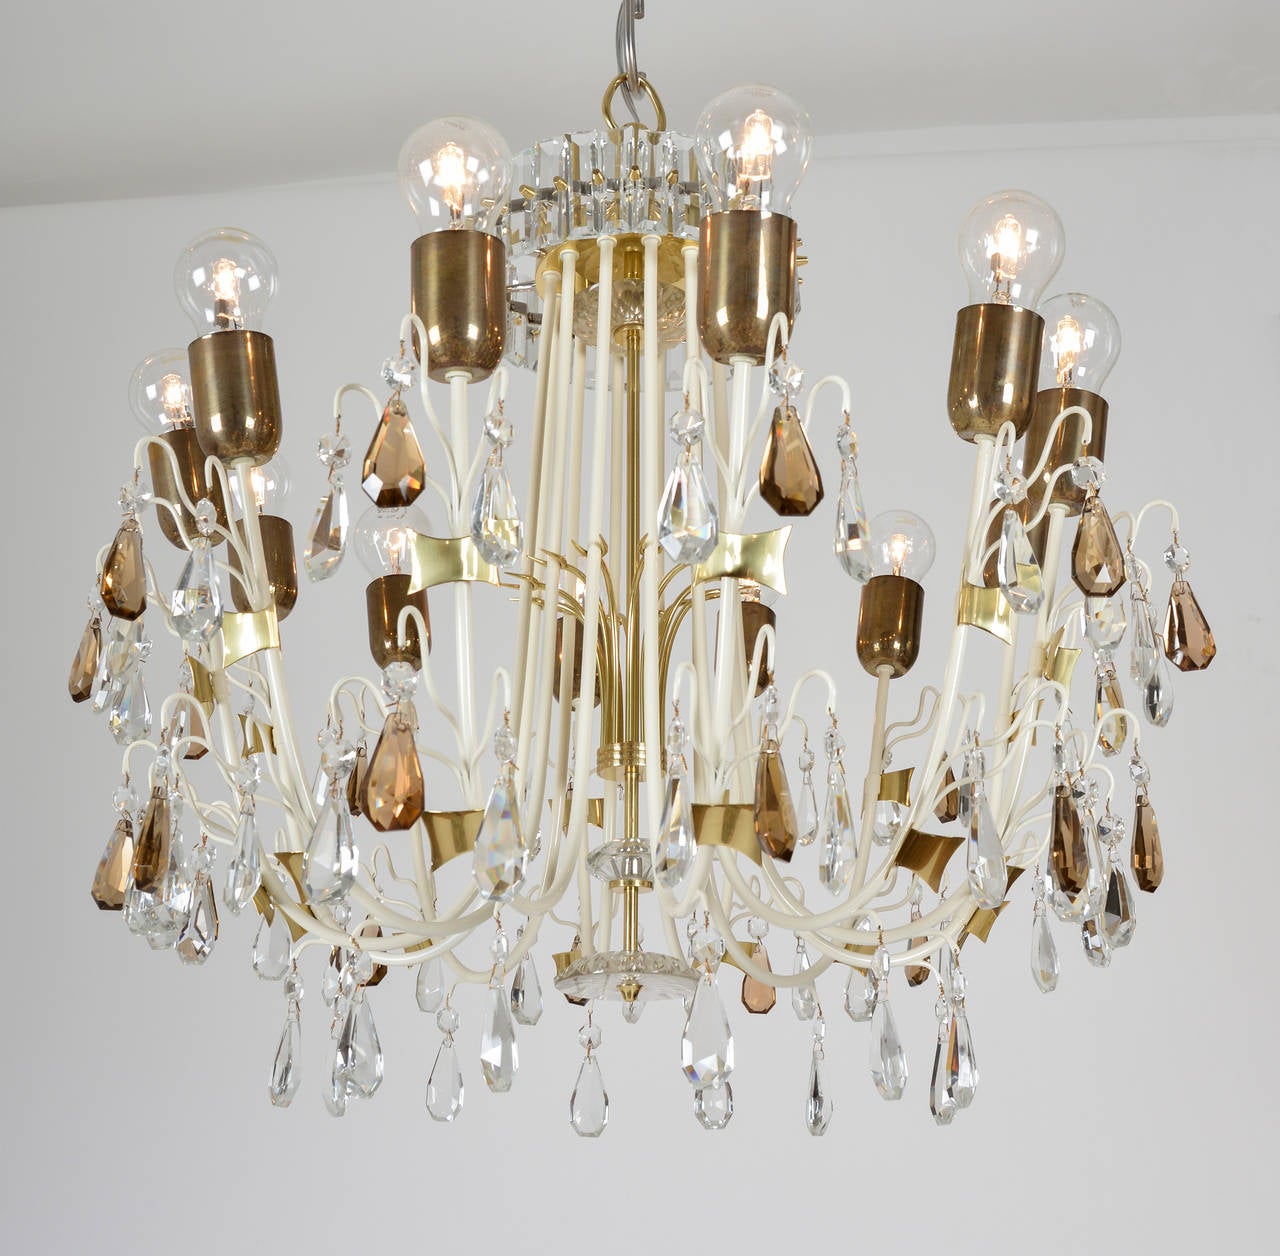 Delicate crystal chandelier of polished and white varnished brass. Pendant crystals on the arms and rare band of rectangular crystals at top. White anchor-shaped frame with playfully placed contrasting brass details. Prominent crystal centre parts